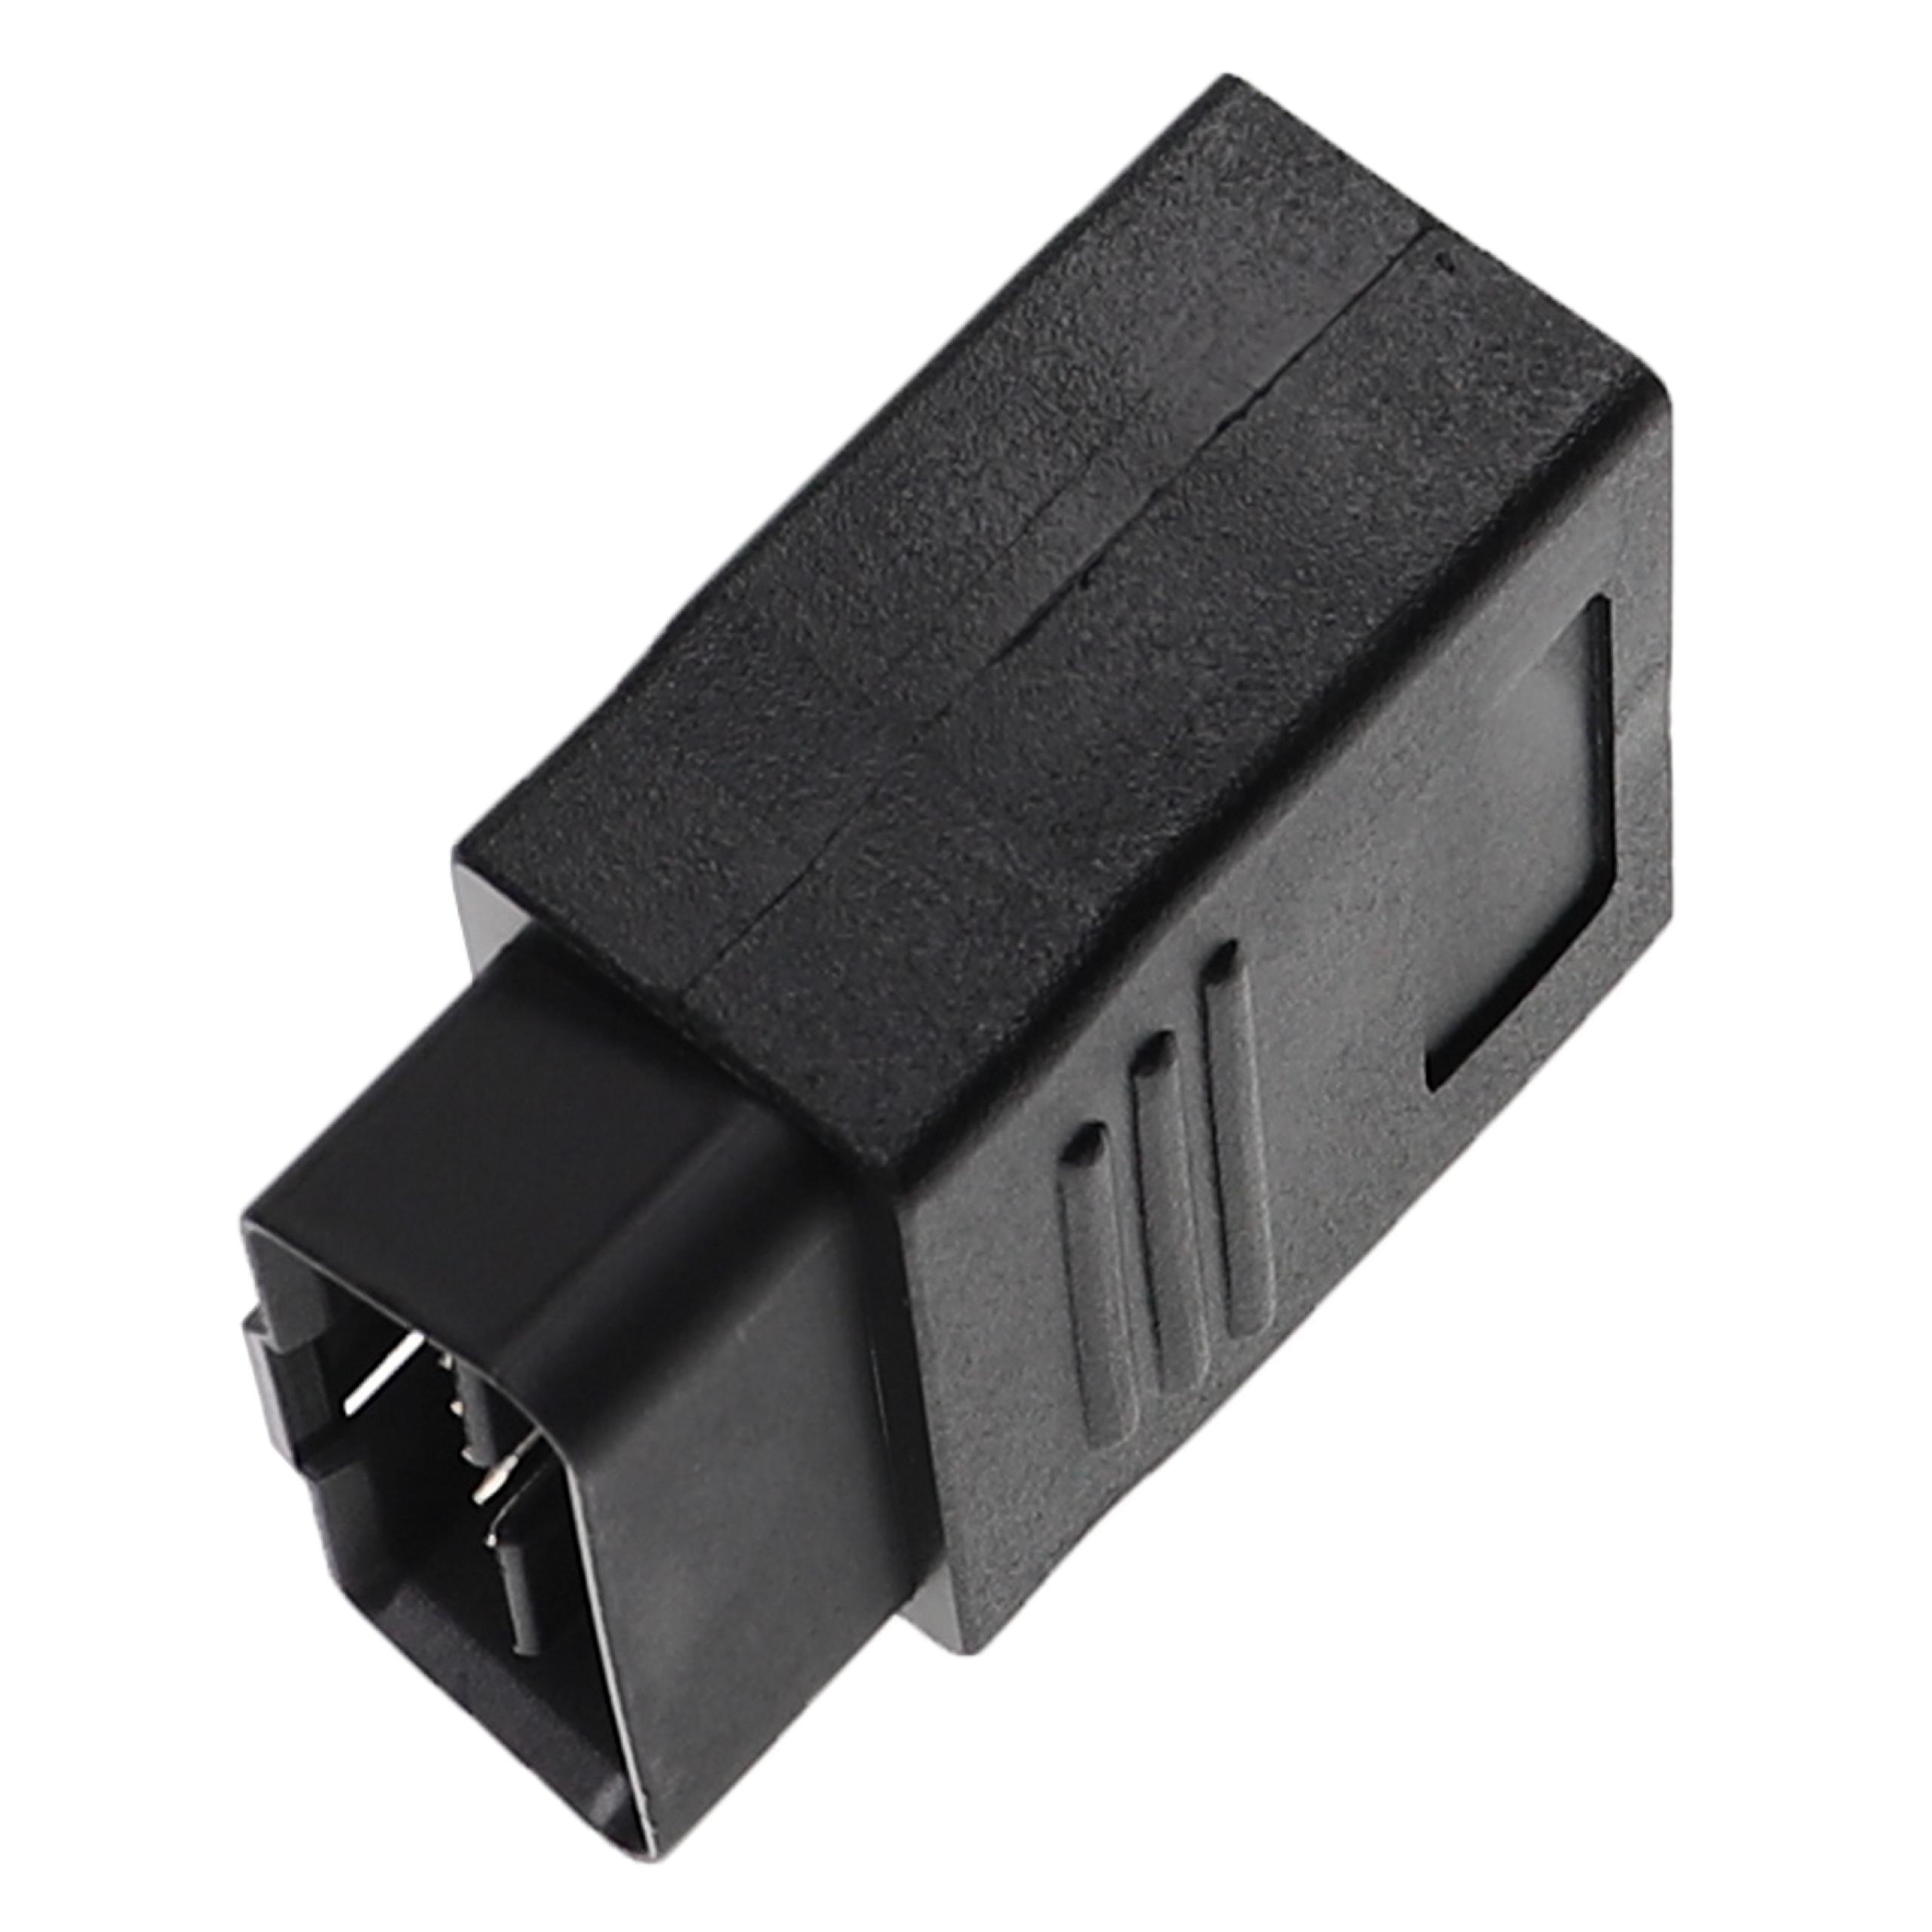 OBD Adapter suitable forVehicle / Diagnostic Device - OBD2 Cable